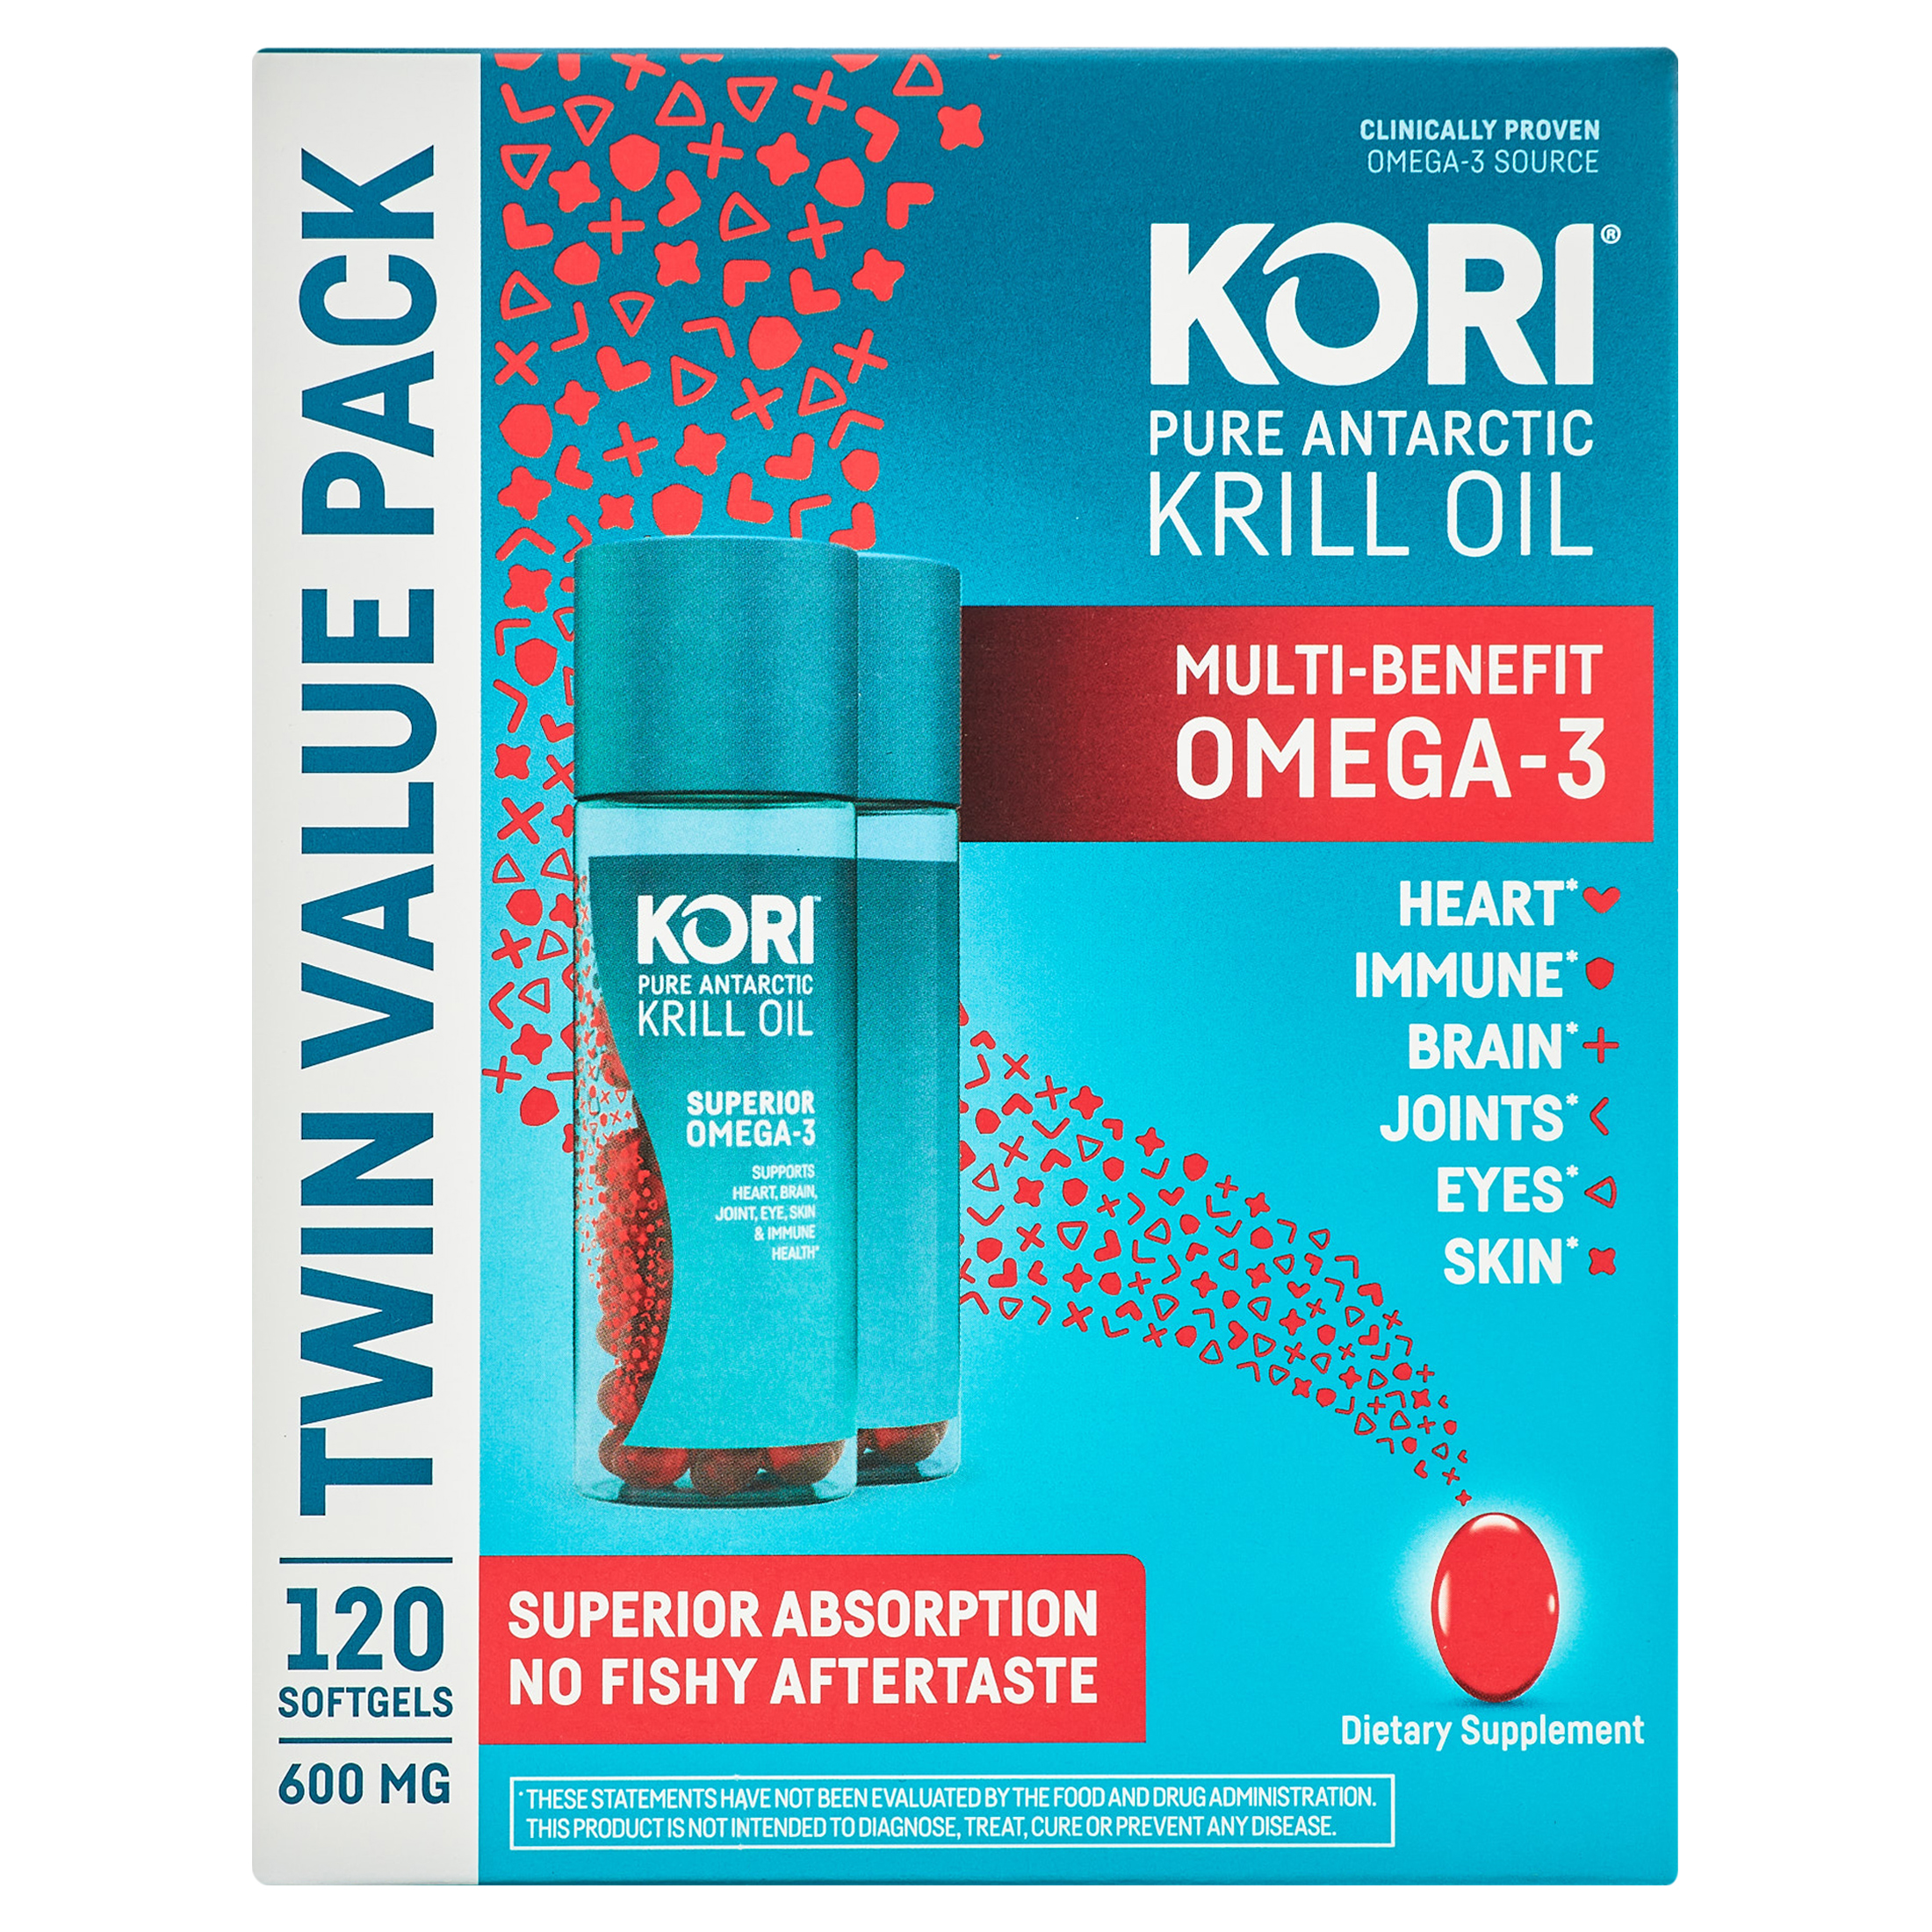 Kori Krill Superior Absorption, Omega-3 Supplement for Overall Health, 120 Count, Twin Pack - image 1 of 7